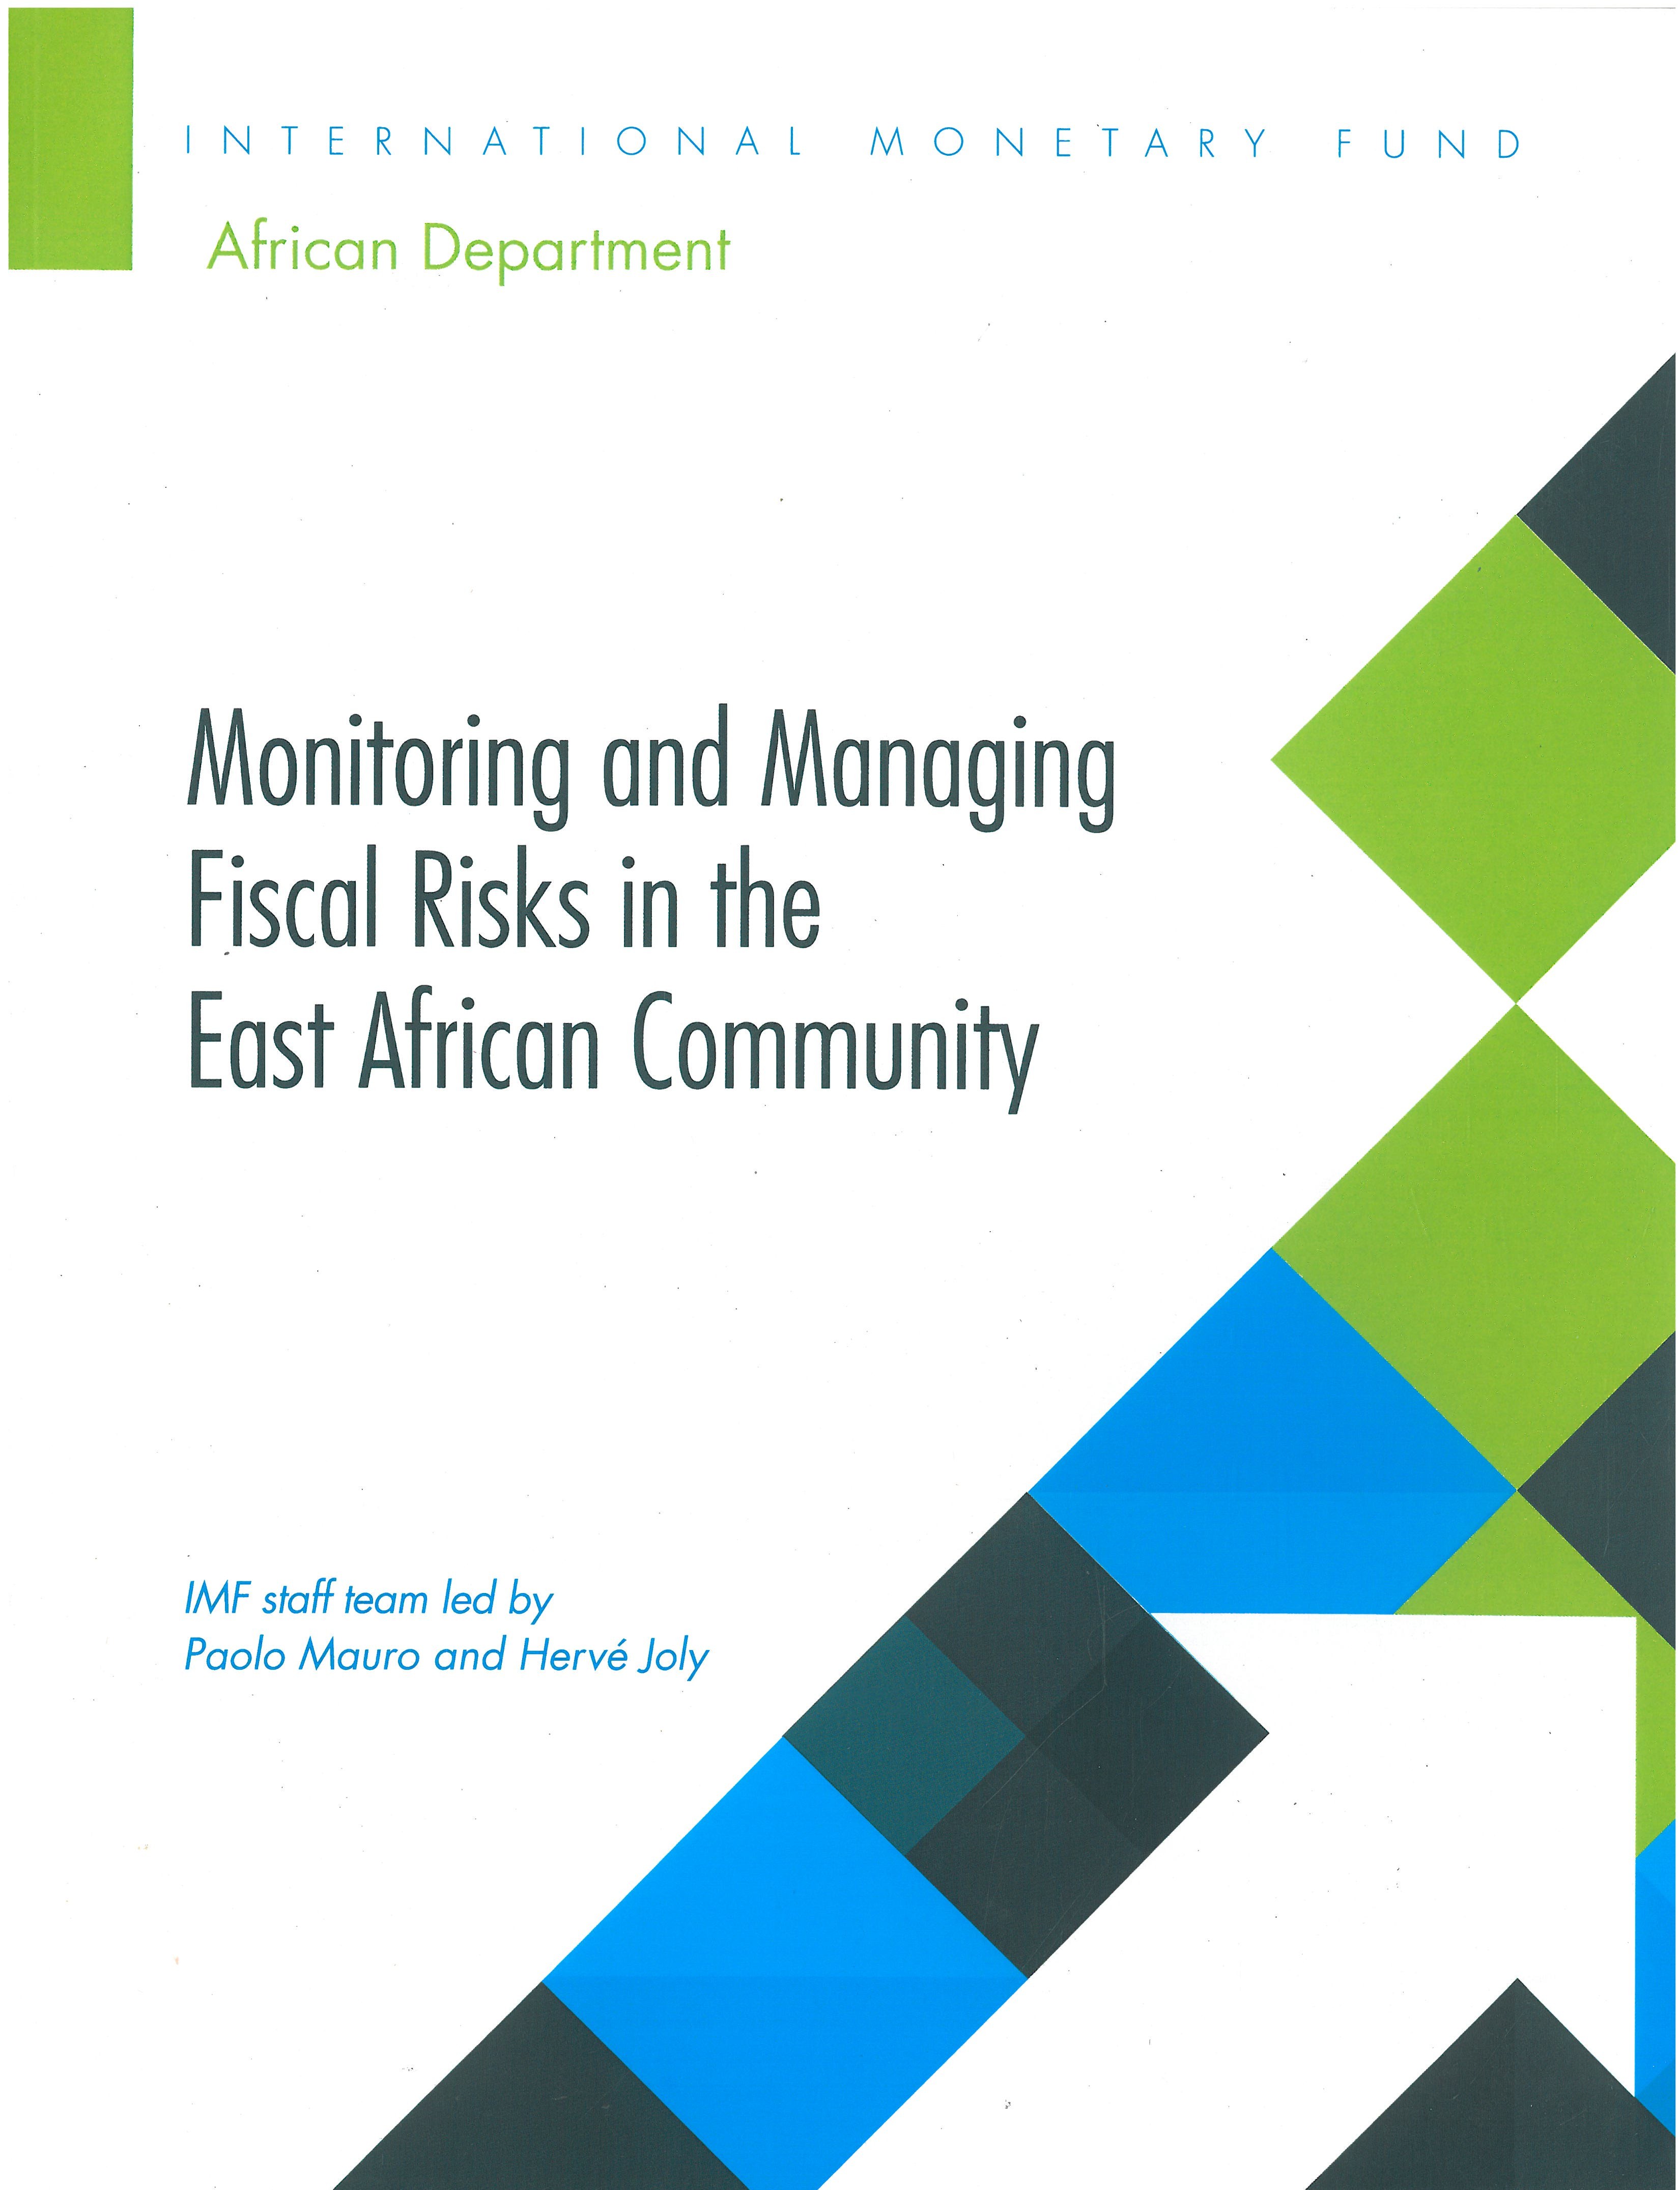 Monitoring and managing fiscal risks in the East African Community 책표지